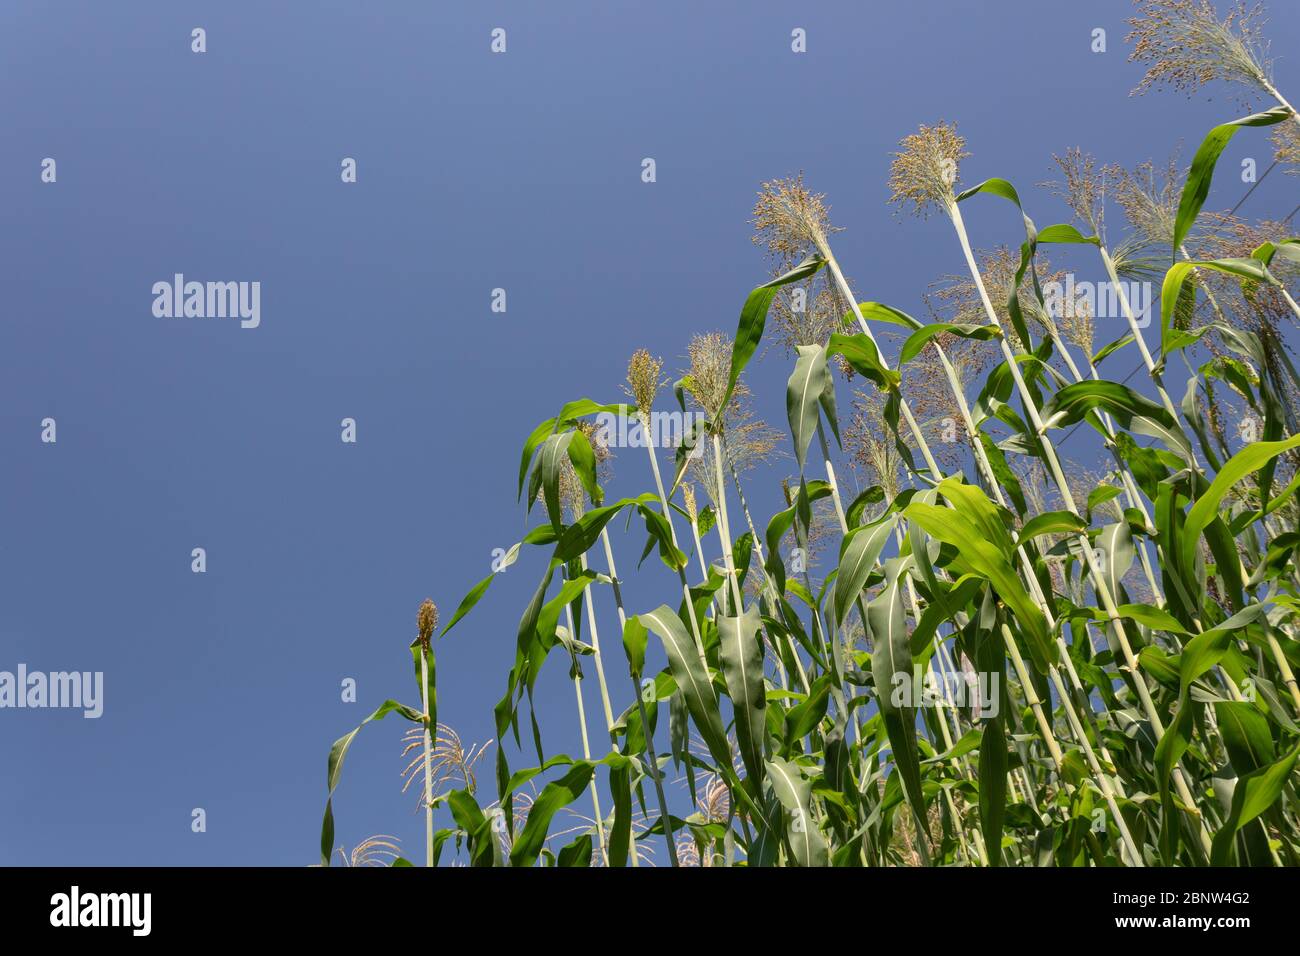 Broom corn, sorghum millet, growing tall against a cloudless blue sky,  horizontal aspect Stock Photo - Alamy